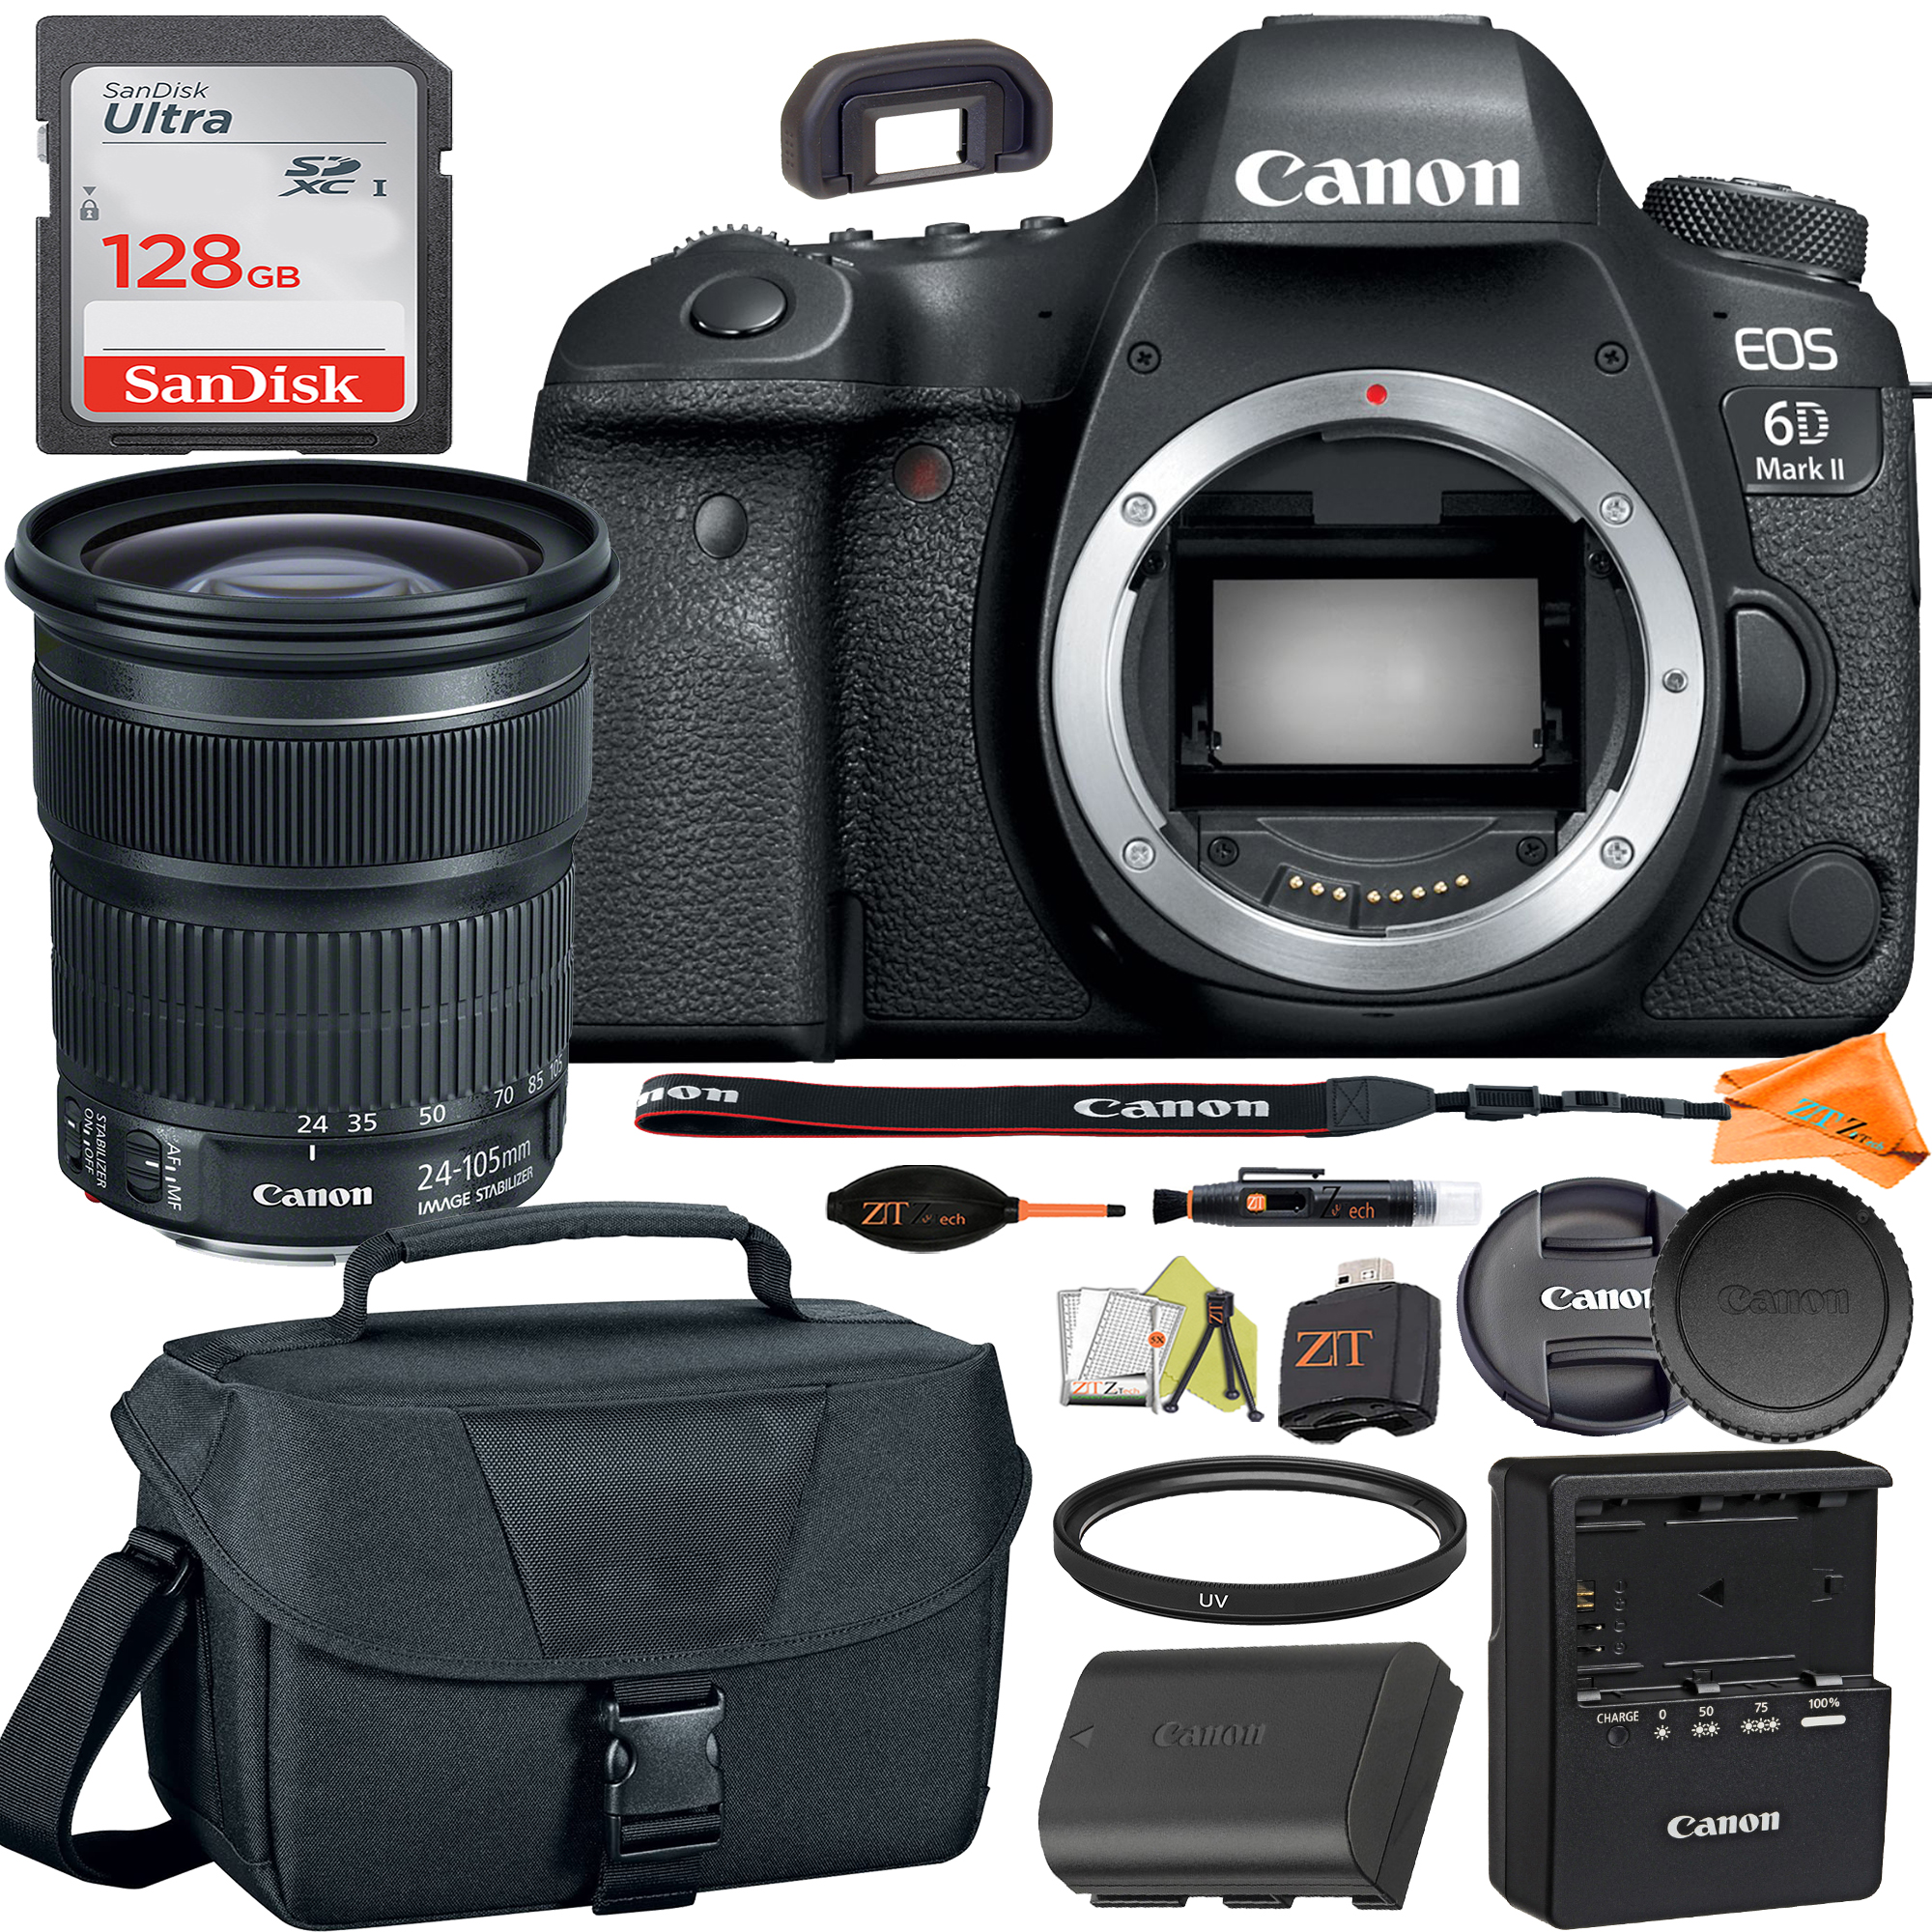 Canon EOS 6D Mark II DSLR Camera with 24-105mm Lens with SanDisk 128GB Card + Case + ZeeTech Accessory Bundle